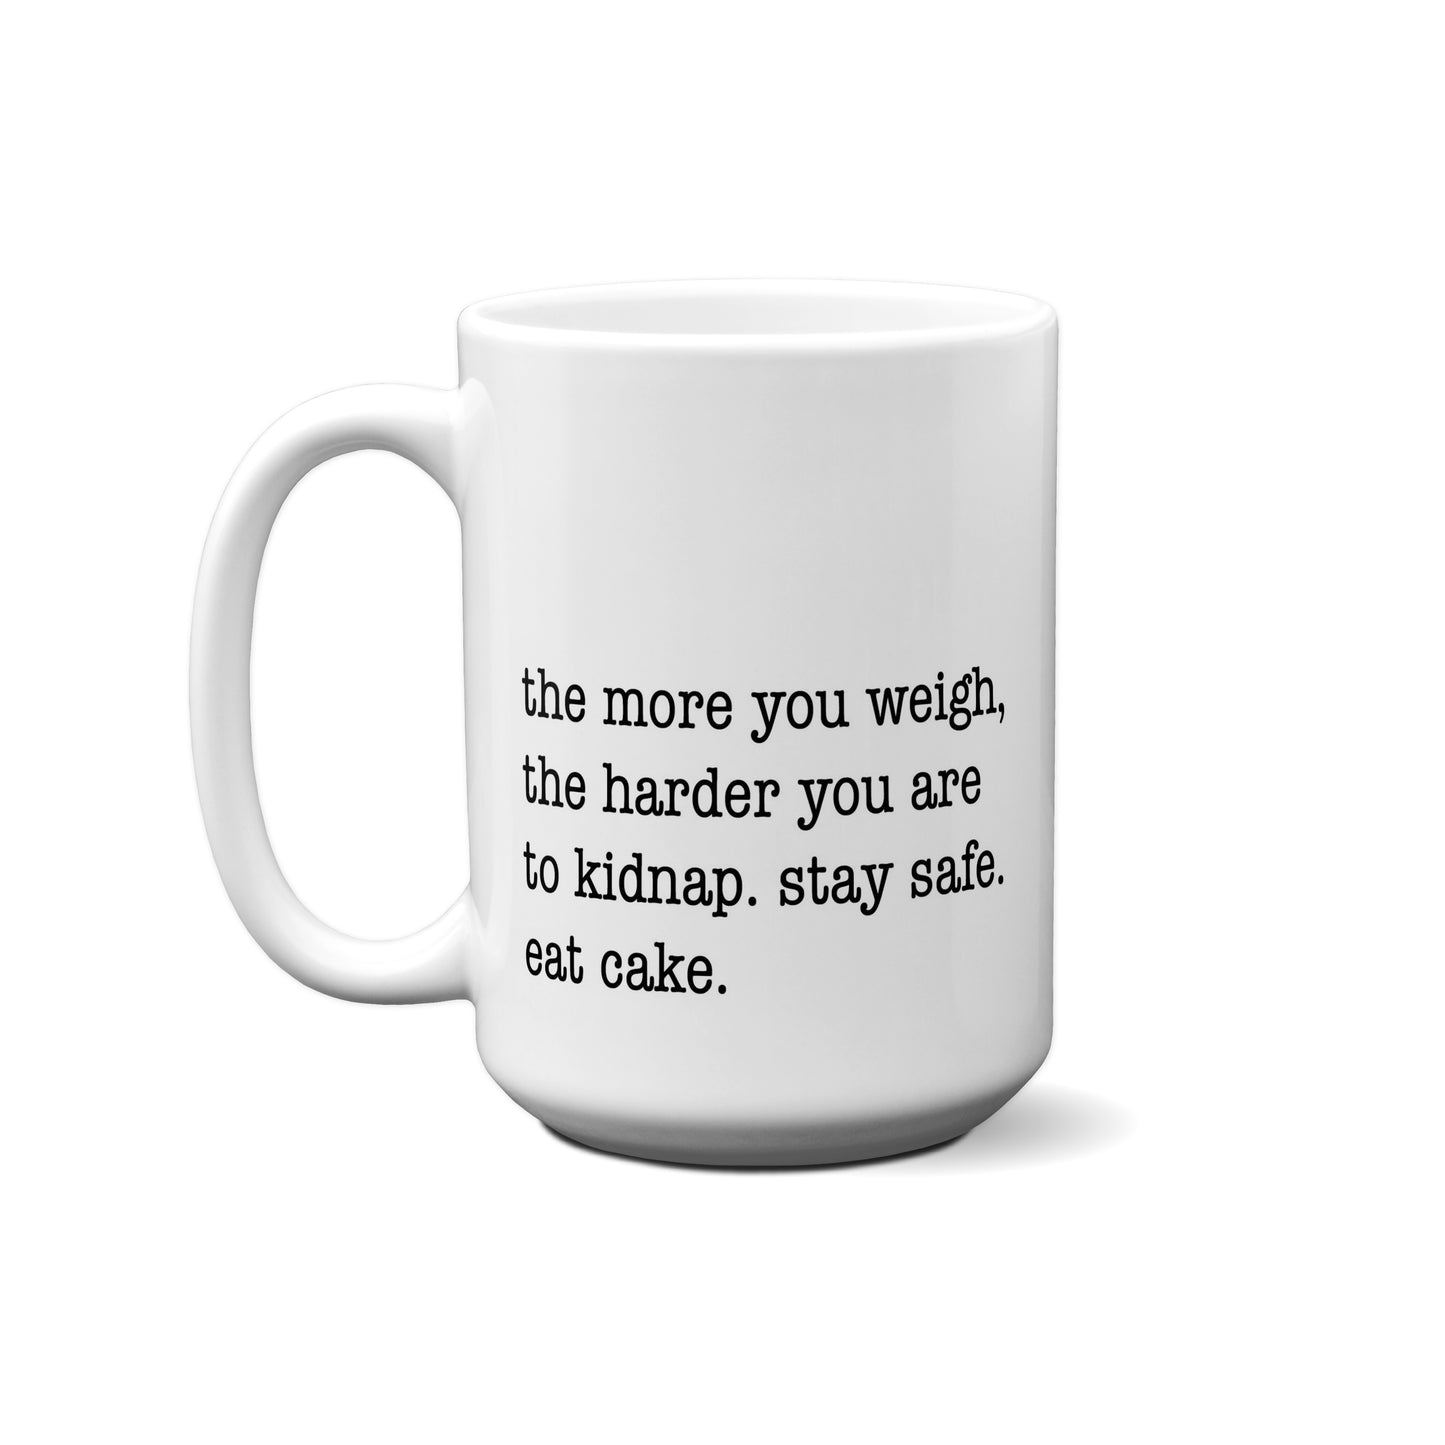 The More You Weigh, The Harder You Are To Kidnap. Stay Safe. Eat Cake. Quote Mug